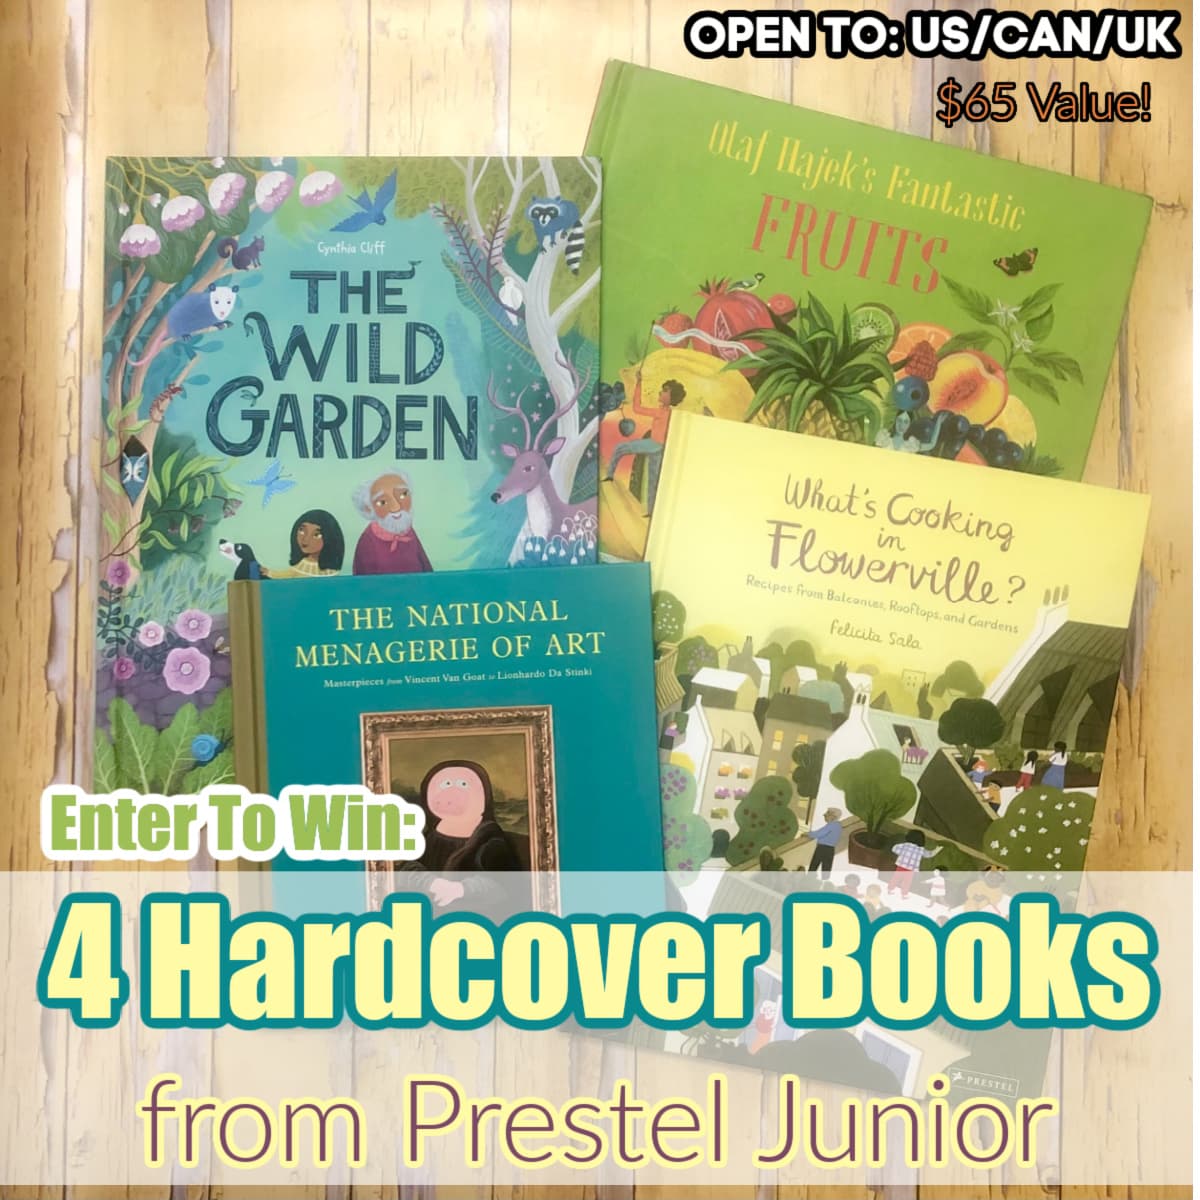 Spring Picture Books from Prestel Junior Celebrate Nature and Art + giveaway (1)